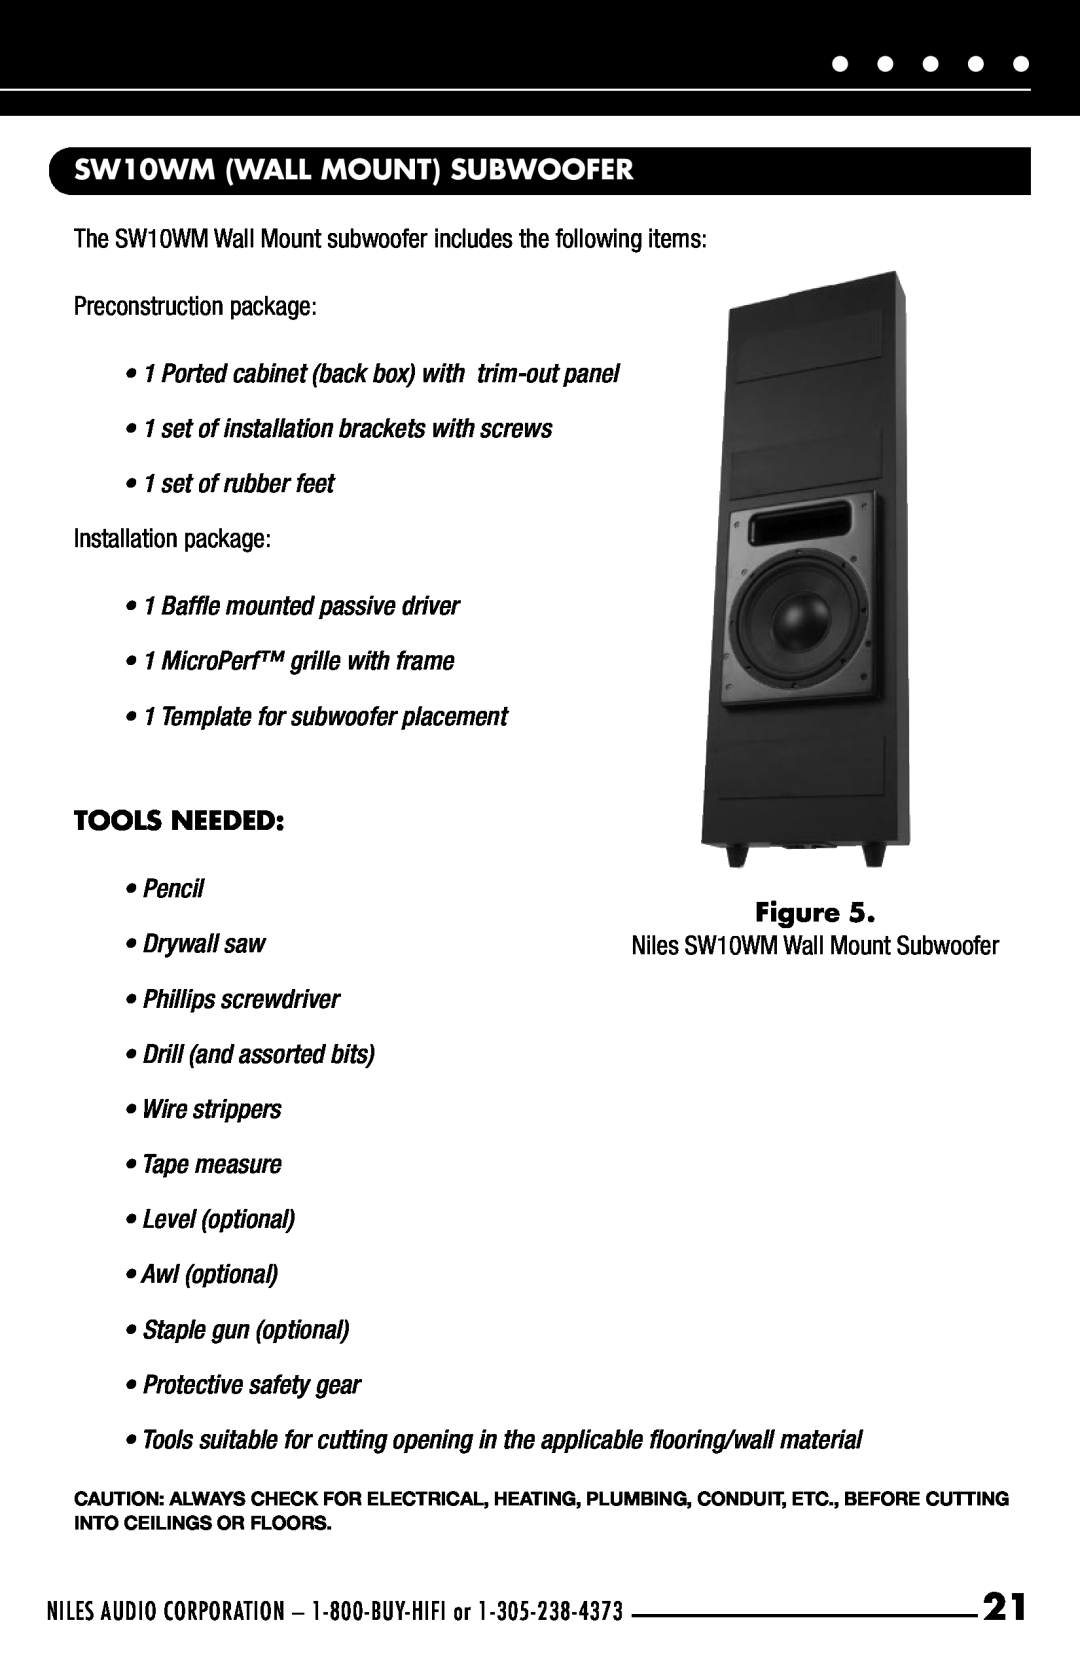 Niles Audio SW10WM WALL MOUNT SUBWOOFER, The SW10WM Wall Mount subwoofer includes the following items, Tools Needed 